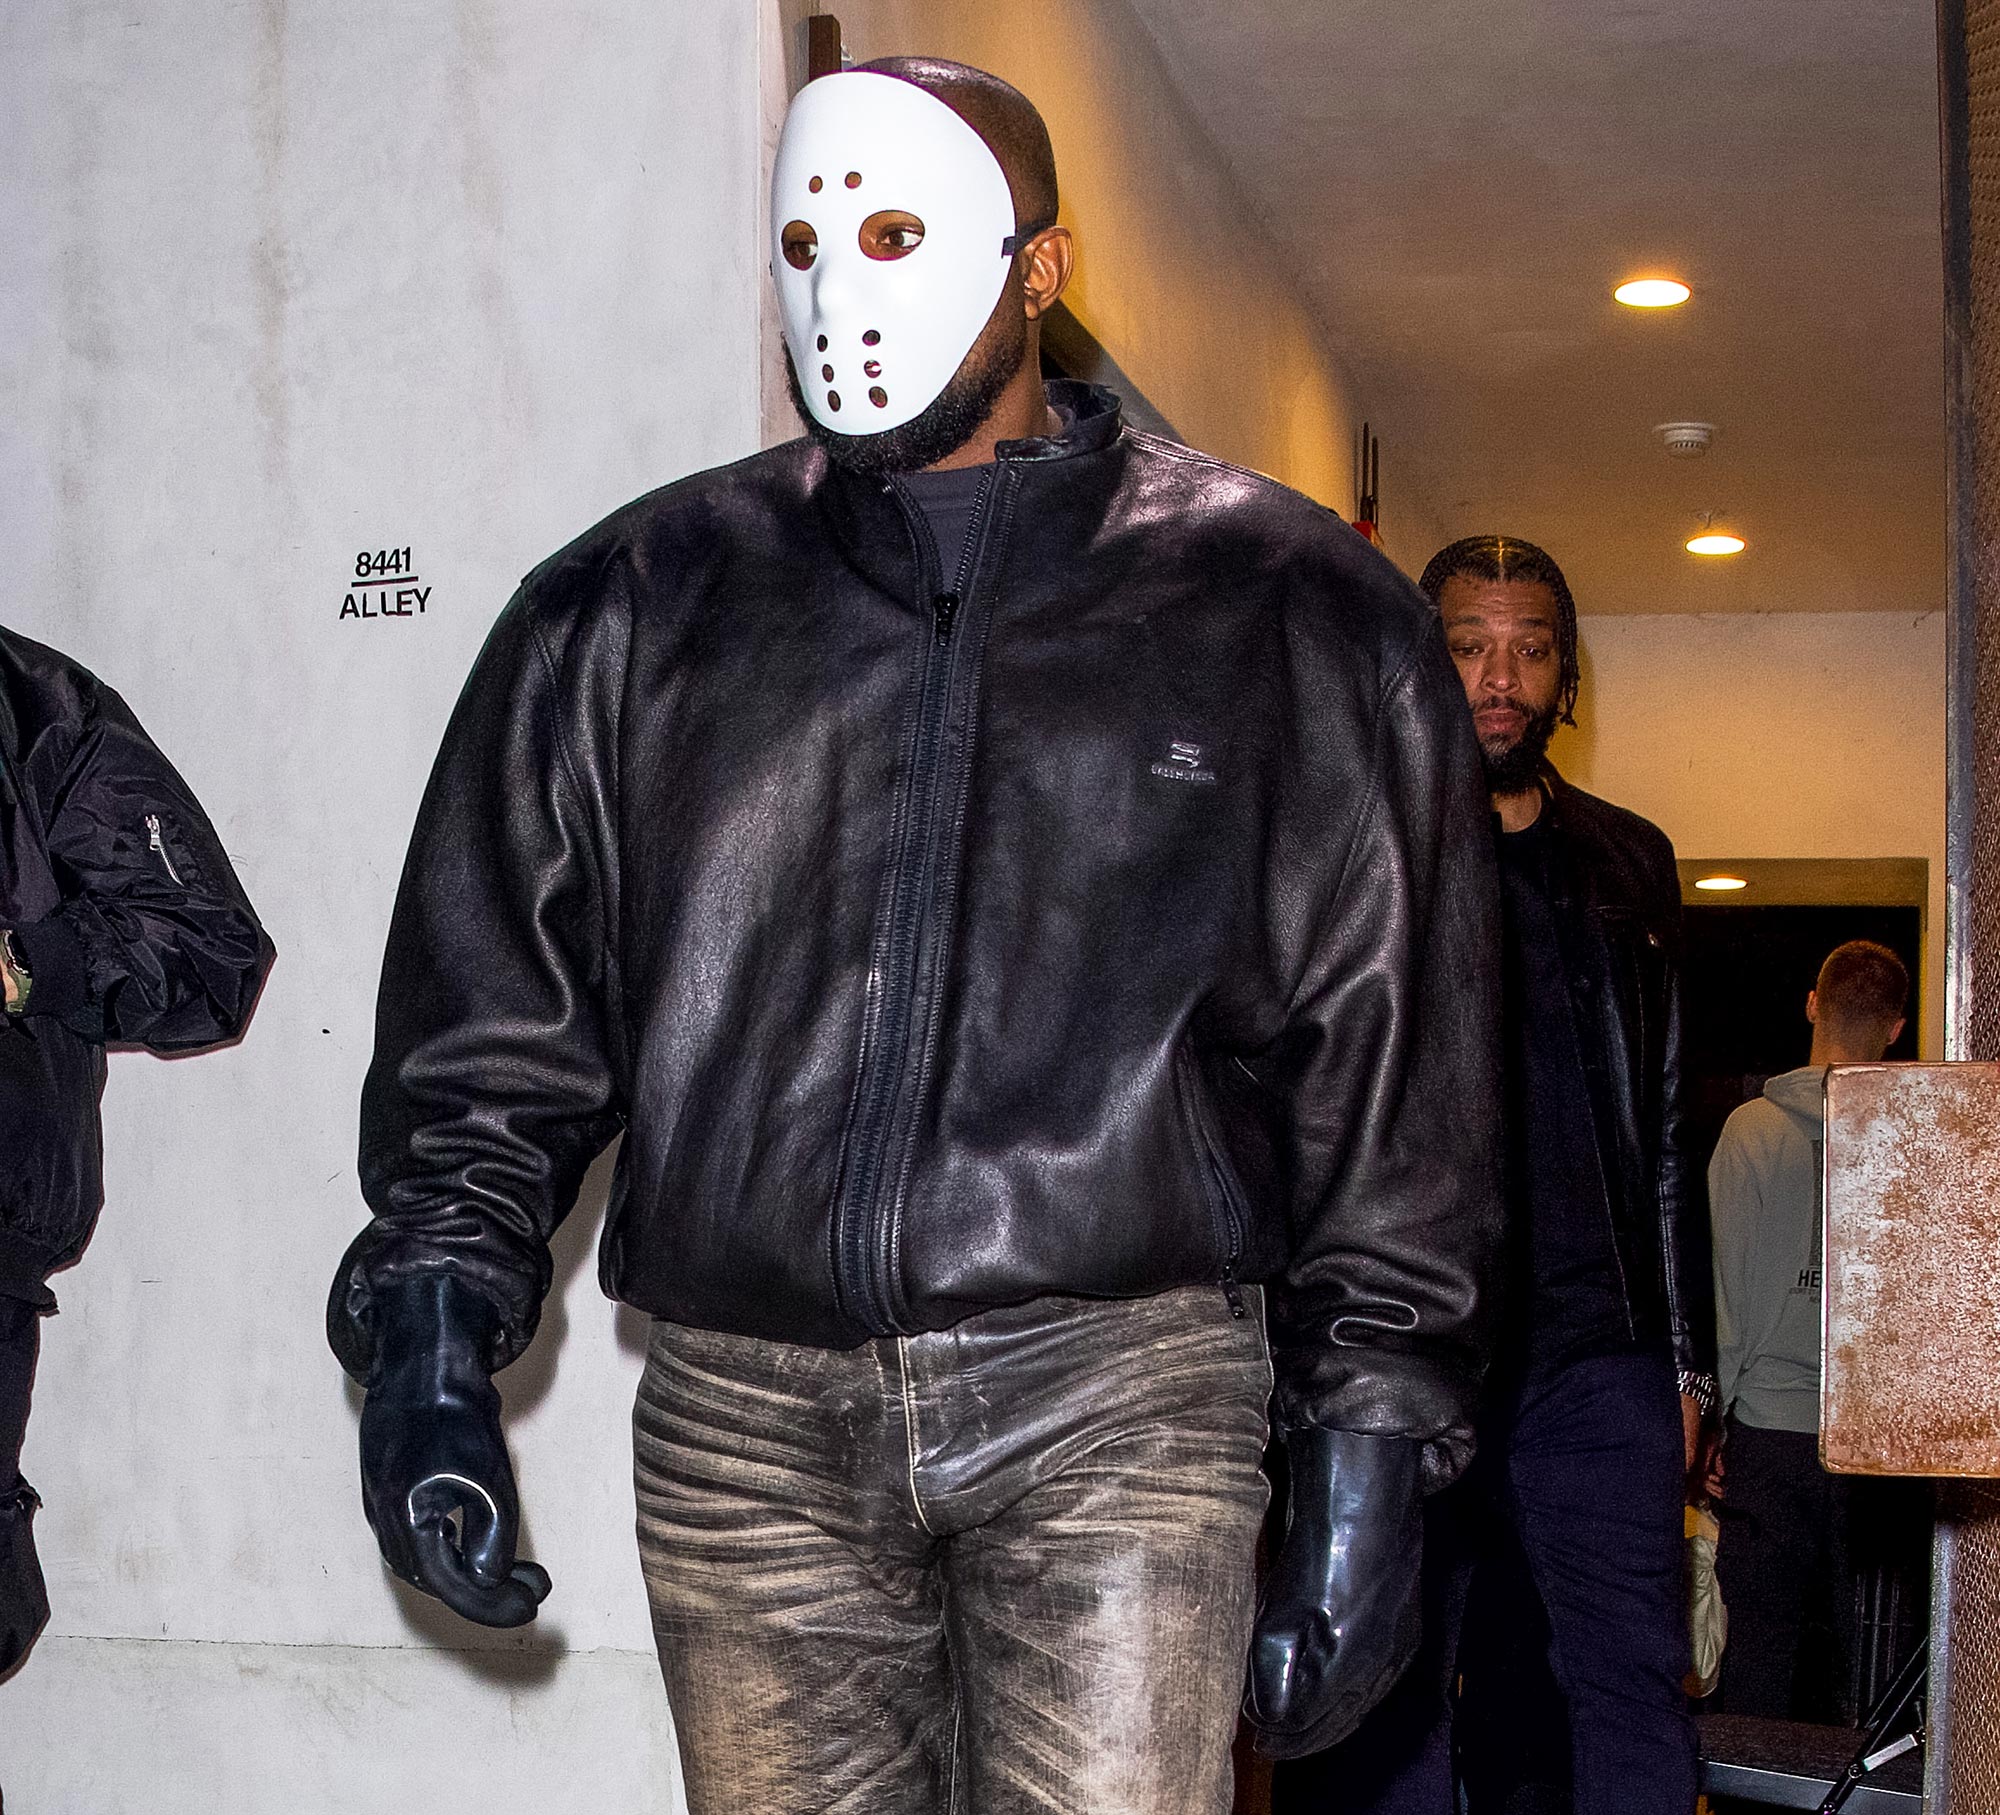 Umm, Did Kanye West Wear a ‘Friday the 13th’ Mask to His Son’s Sports Game? #KanyeWest